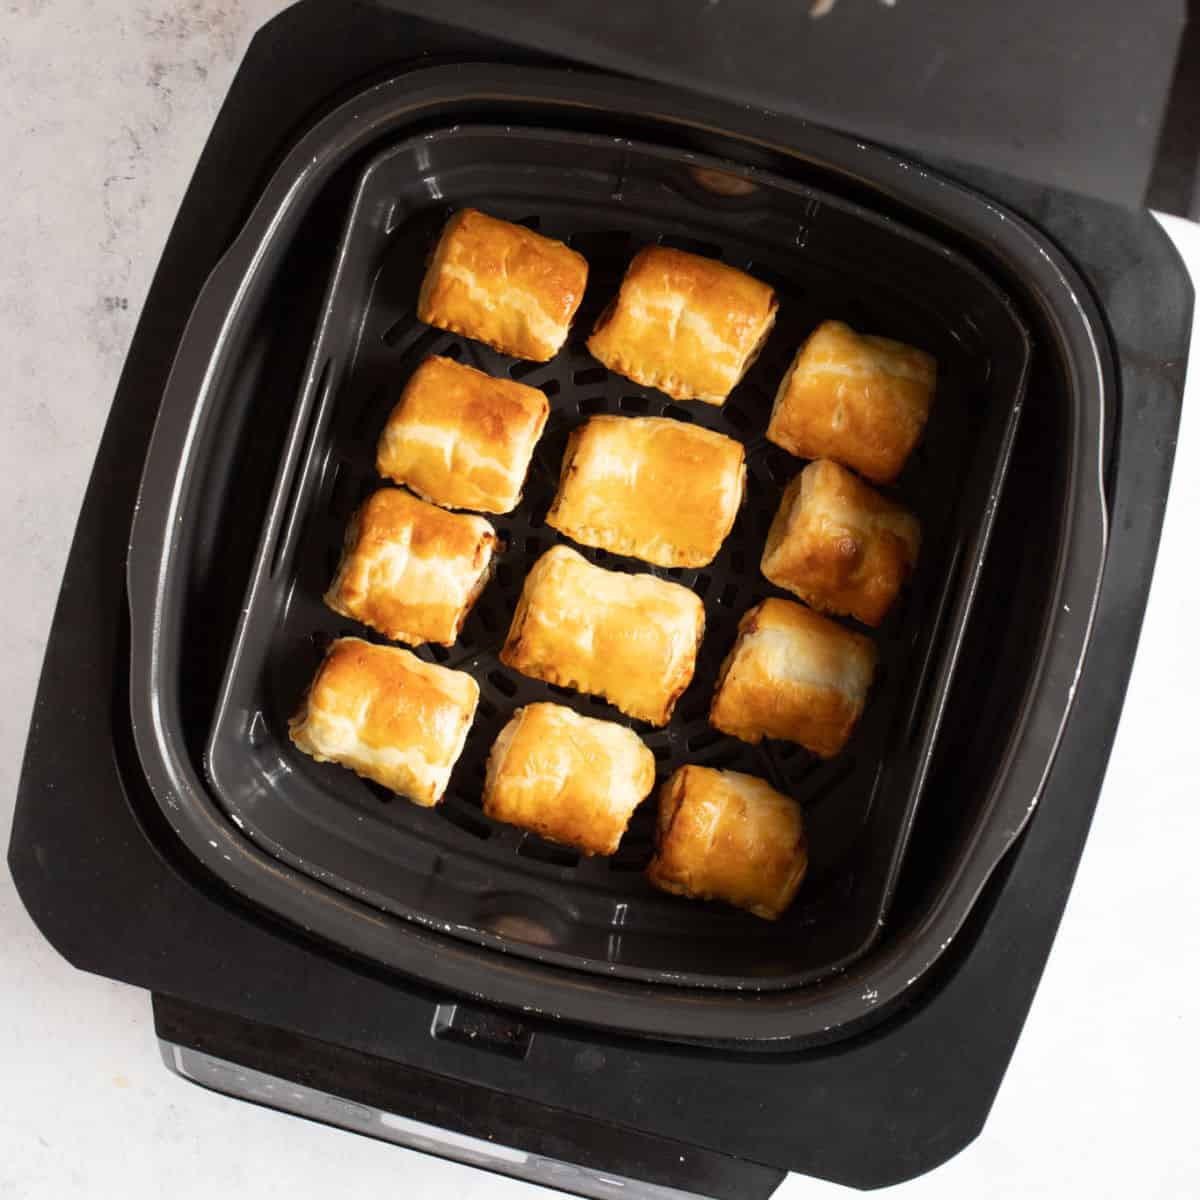 Baked sausage rolls in air fryer.